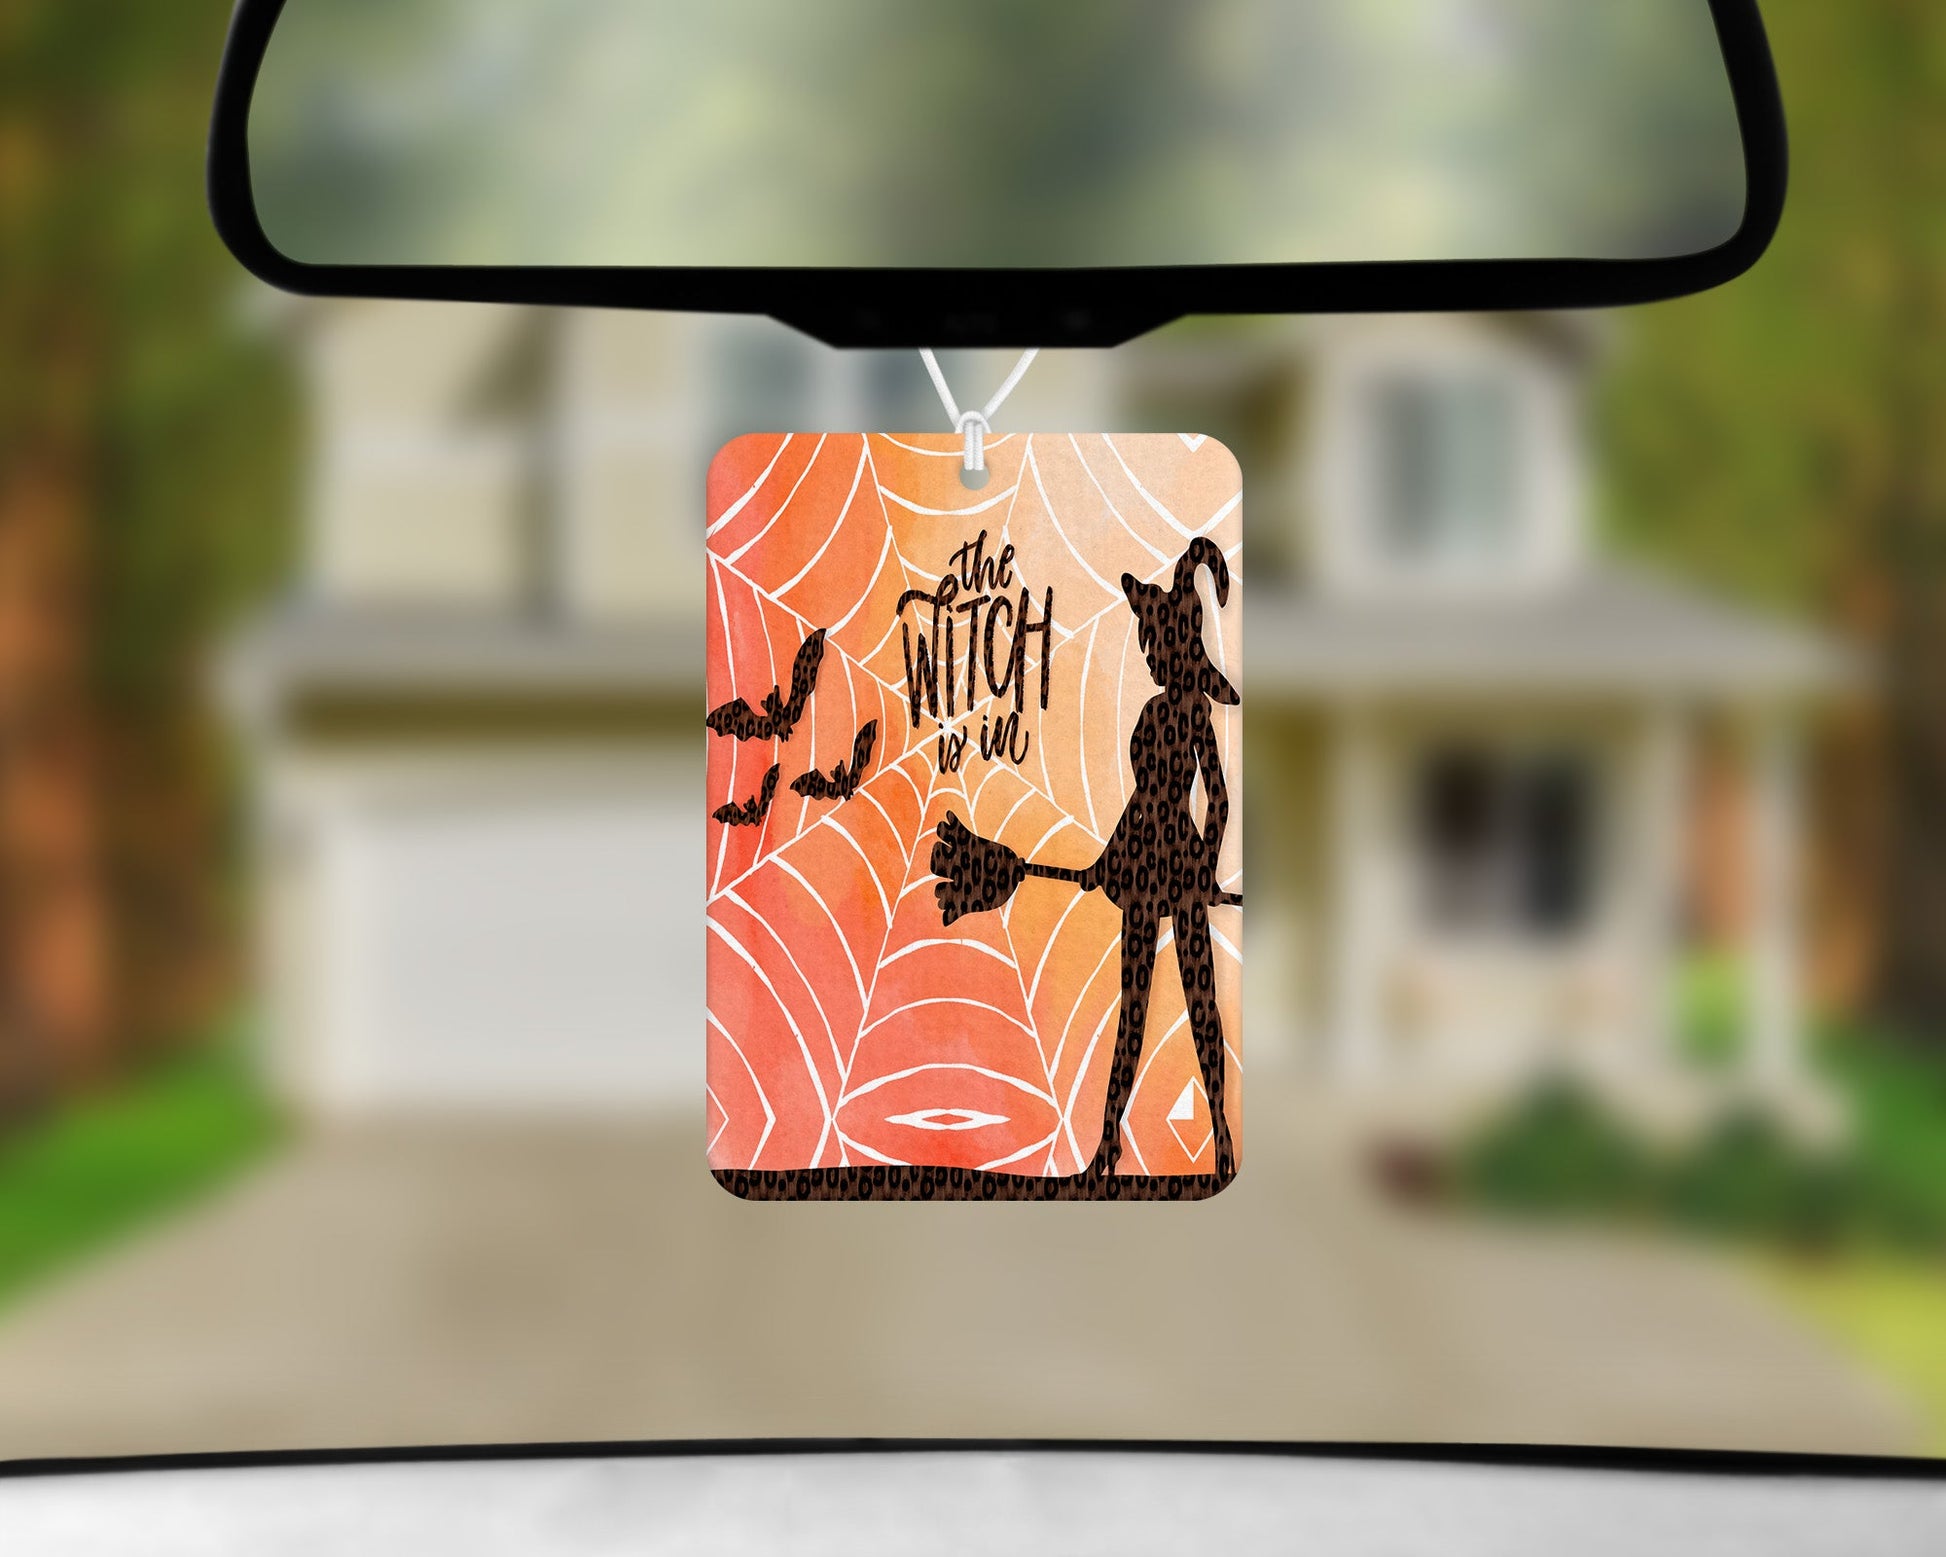 The Witch Is In|Freshie|Includes Scent Bottle - Vehicle Air Freshener